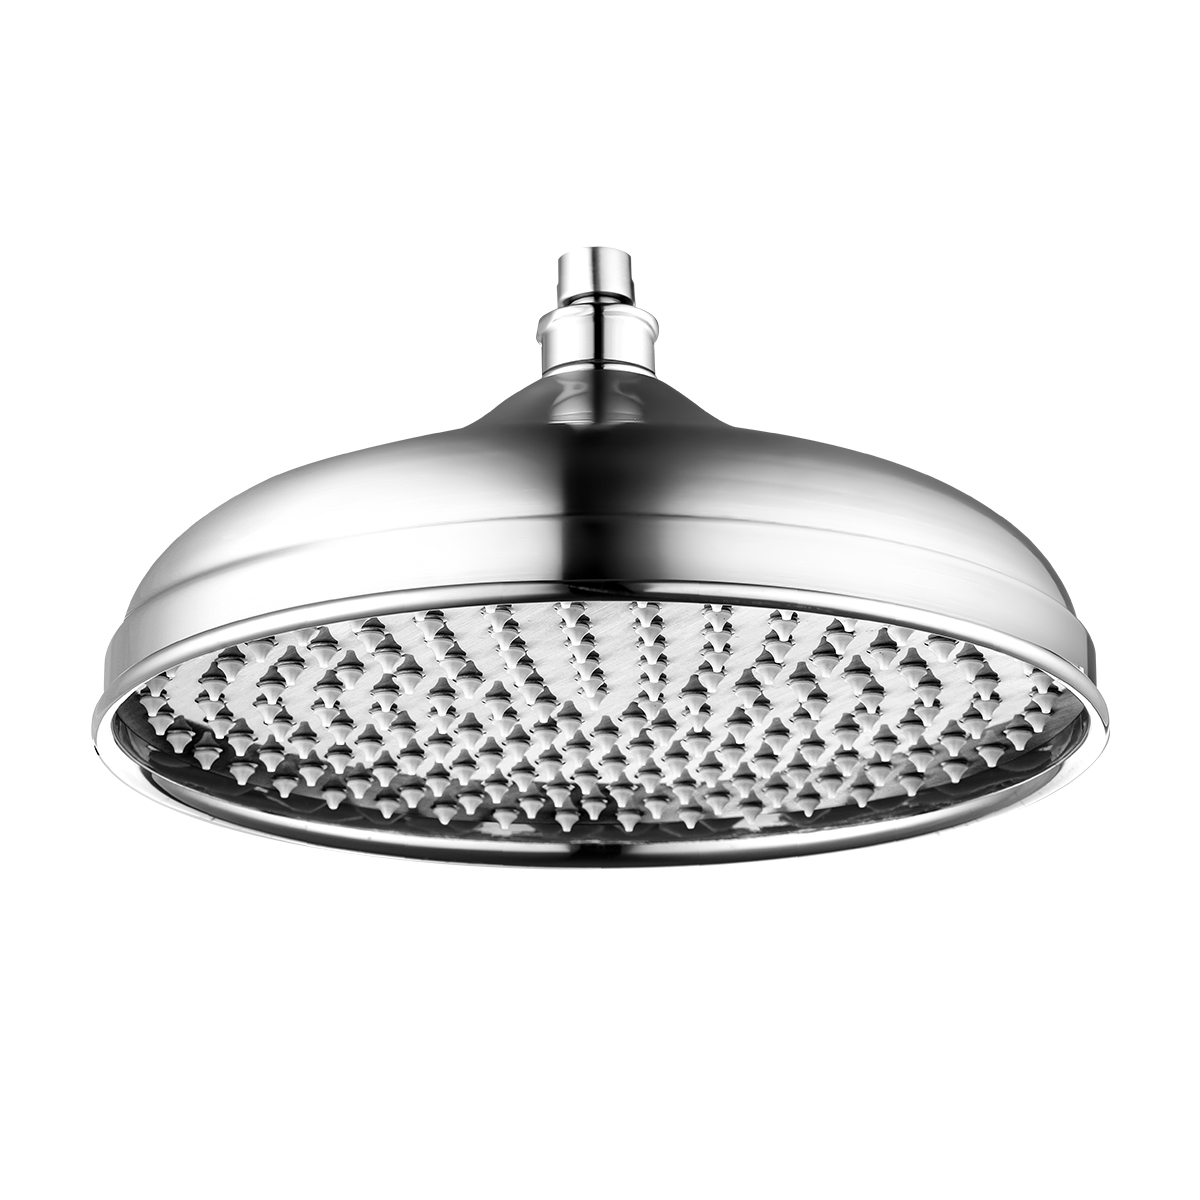 LM9830C Shower head 1-function